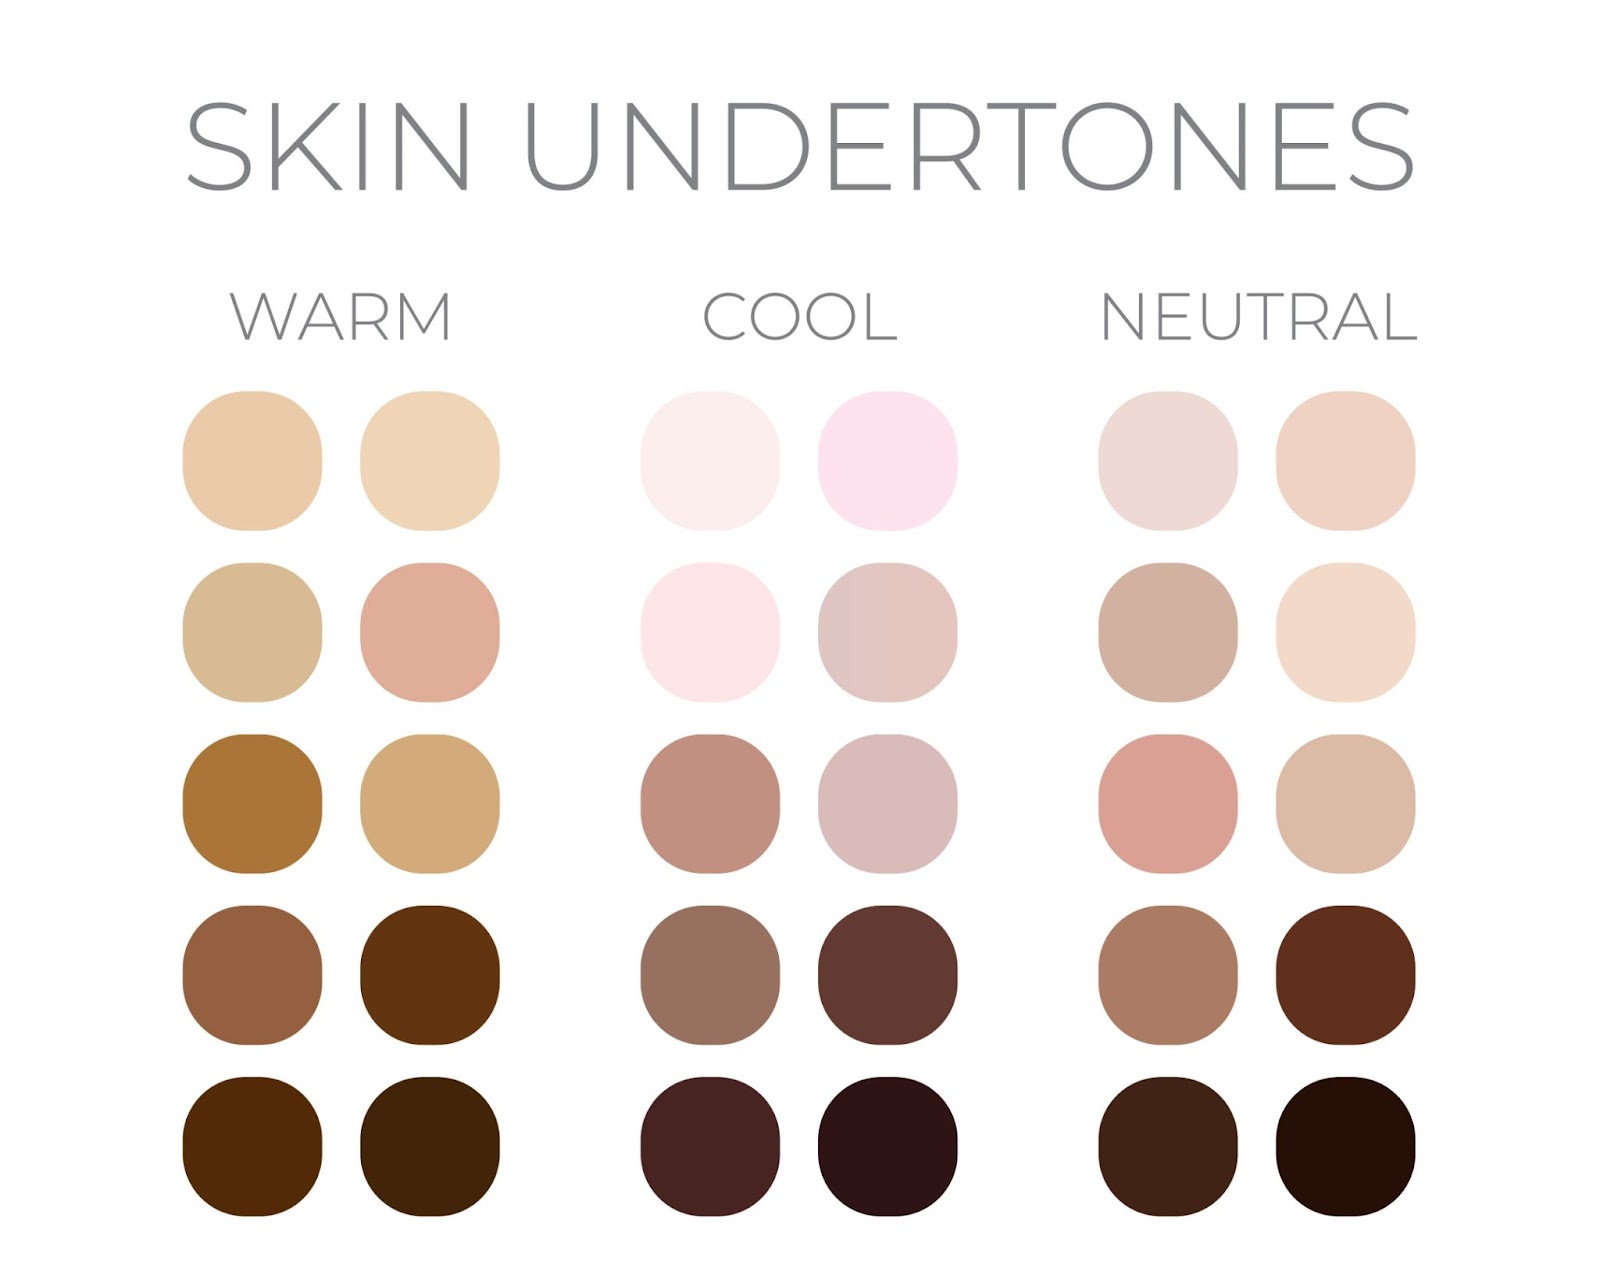 A color swatch chart of warm, cool and neutral skin tones